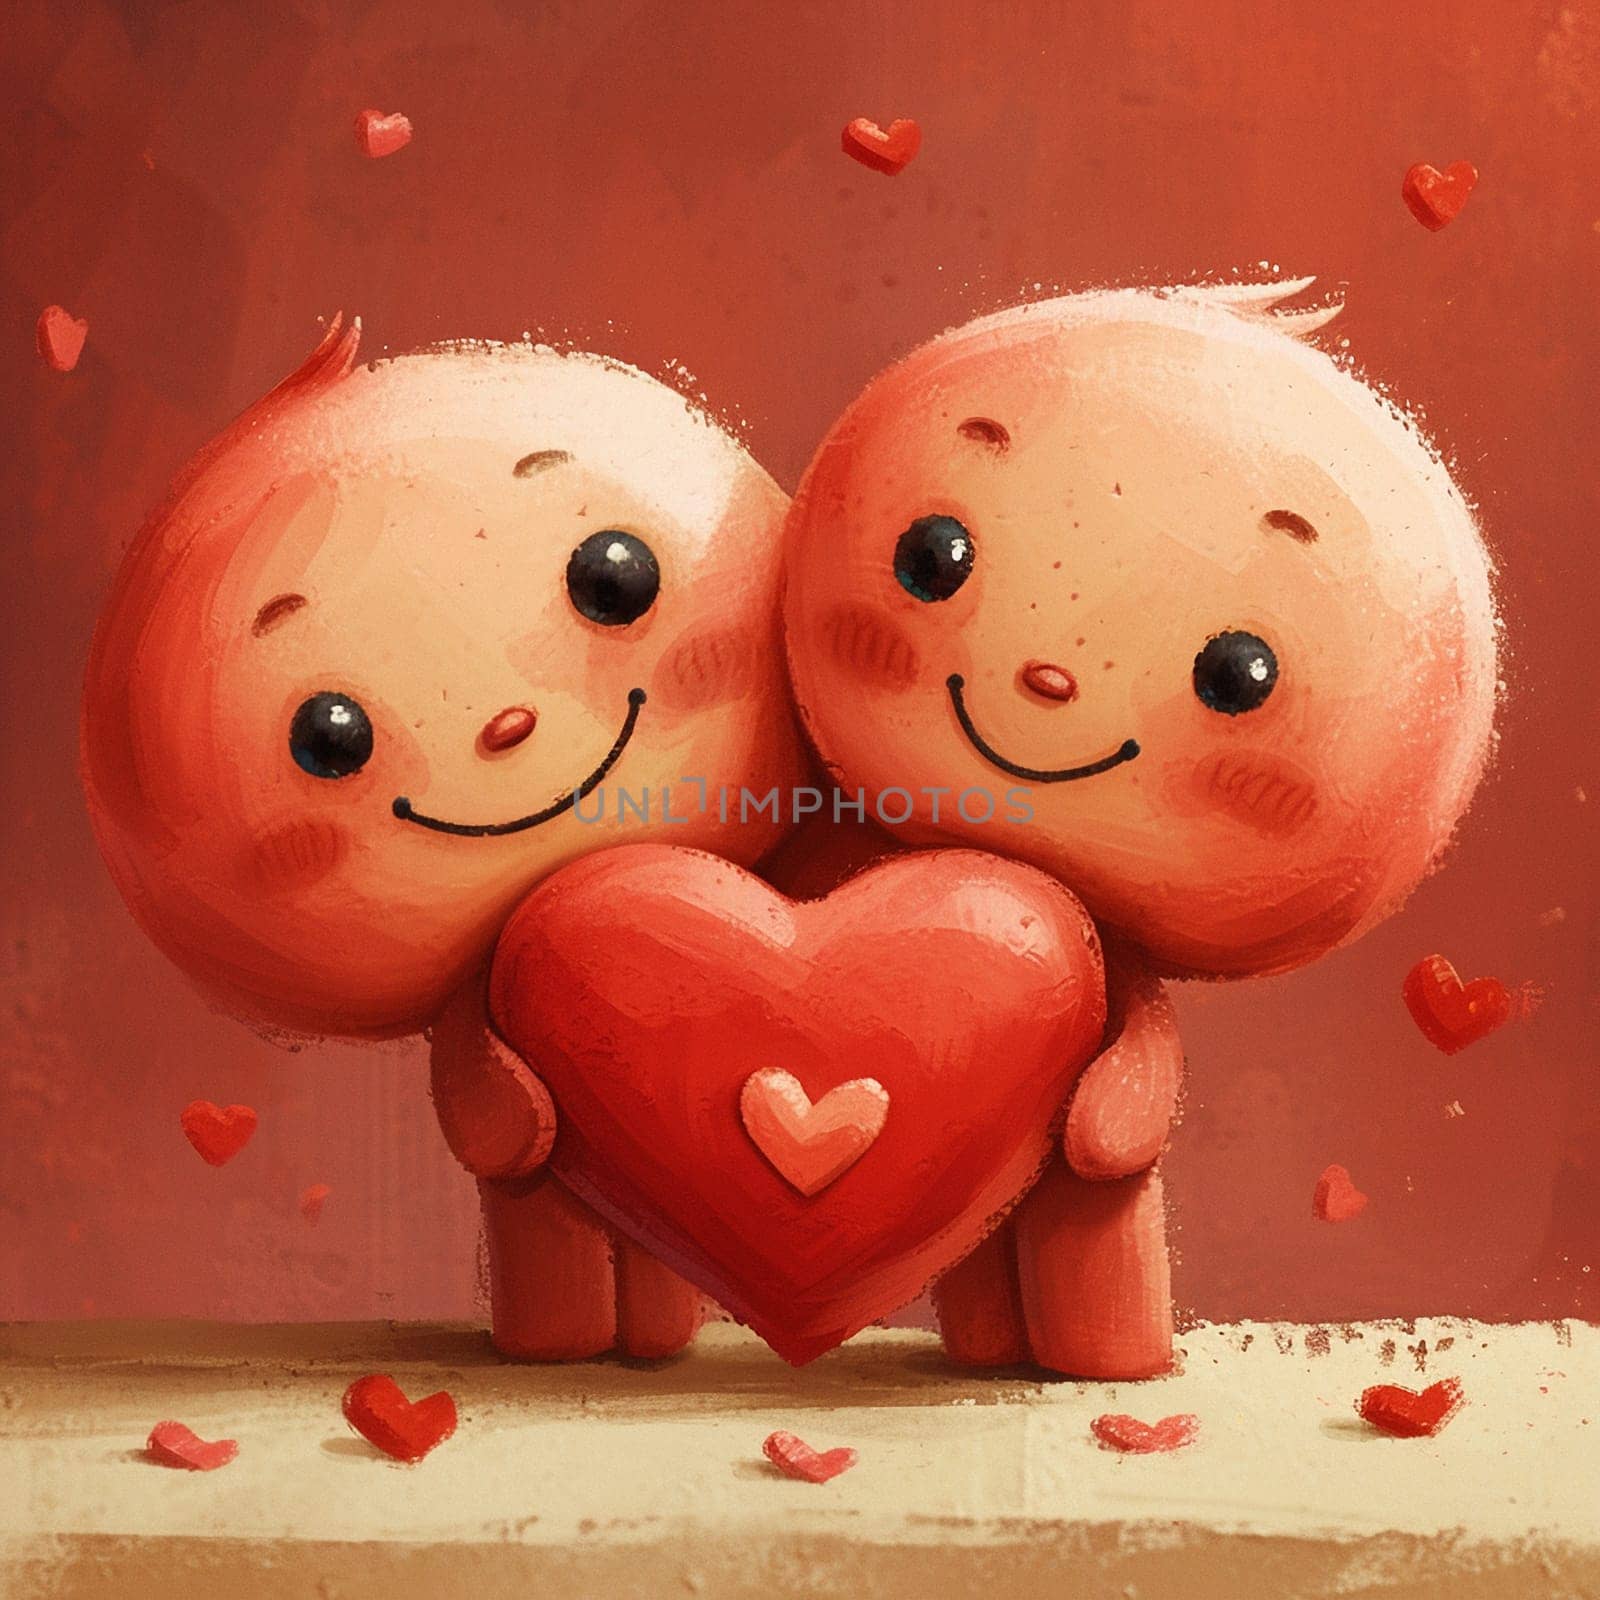 A cute picture for Valentine's Day by NeuroSky